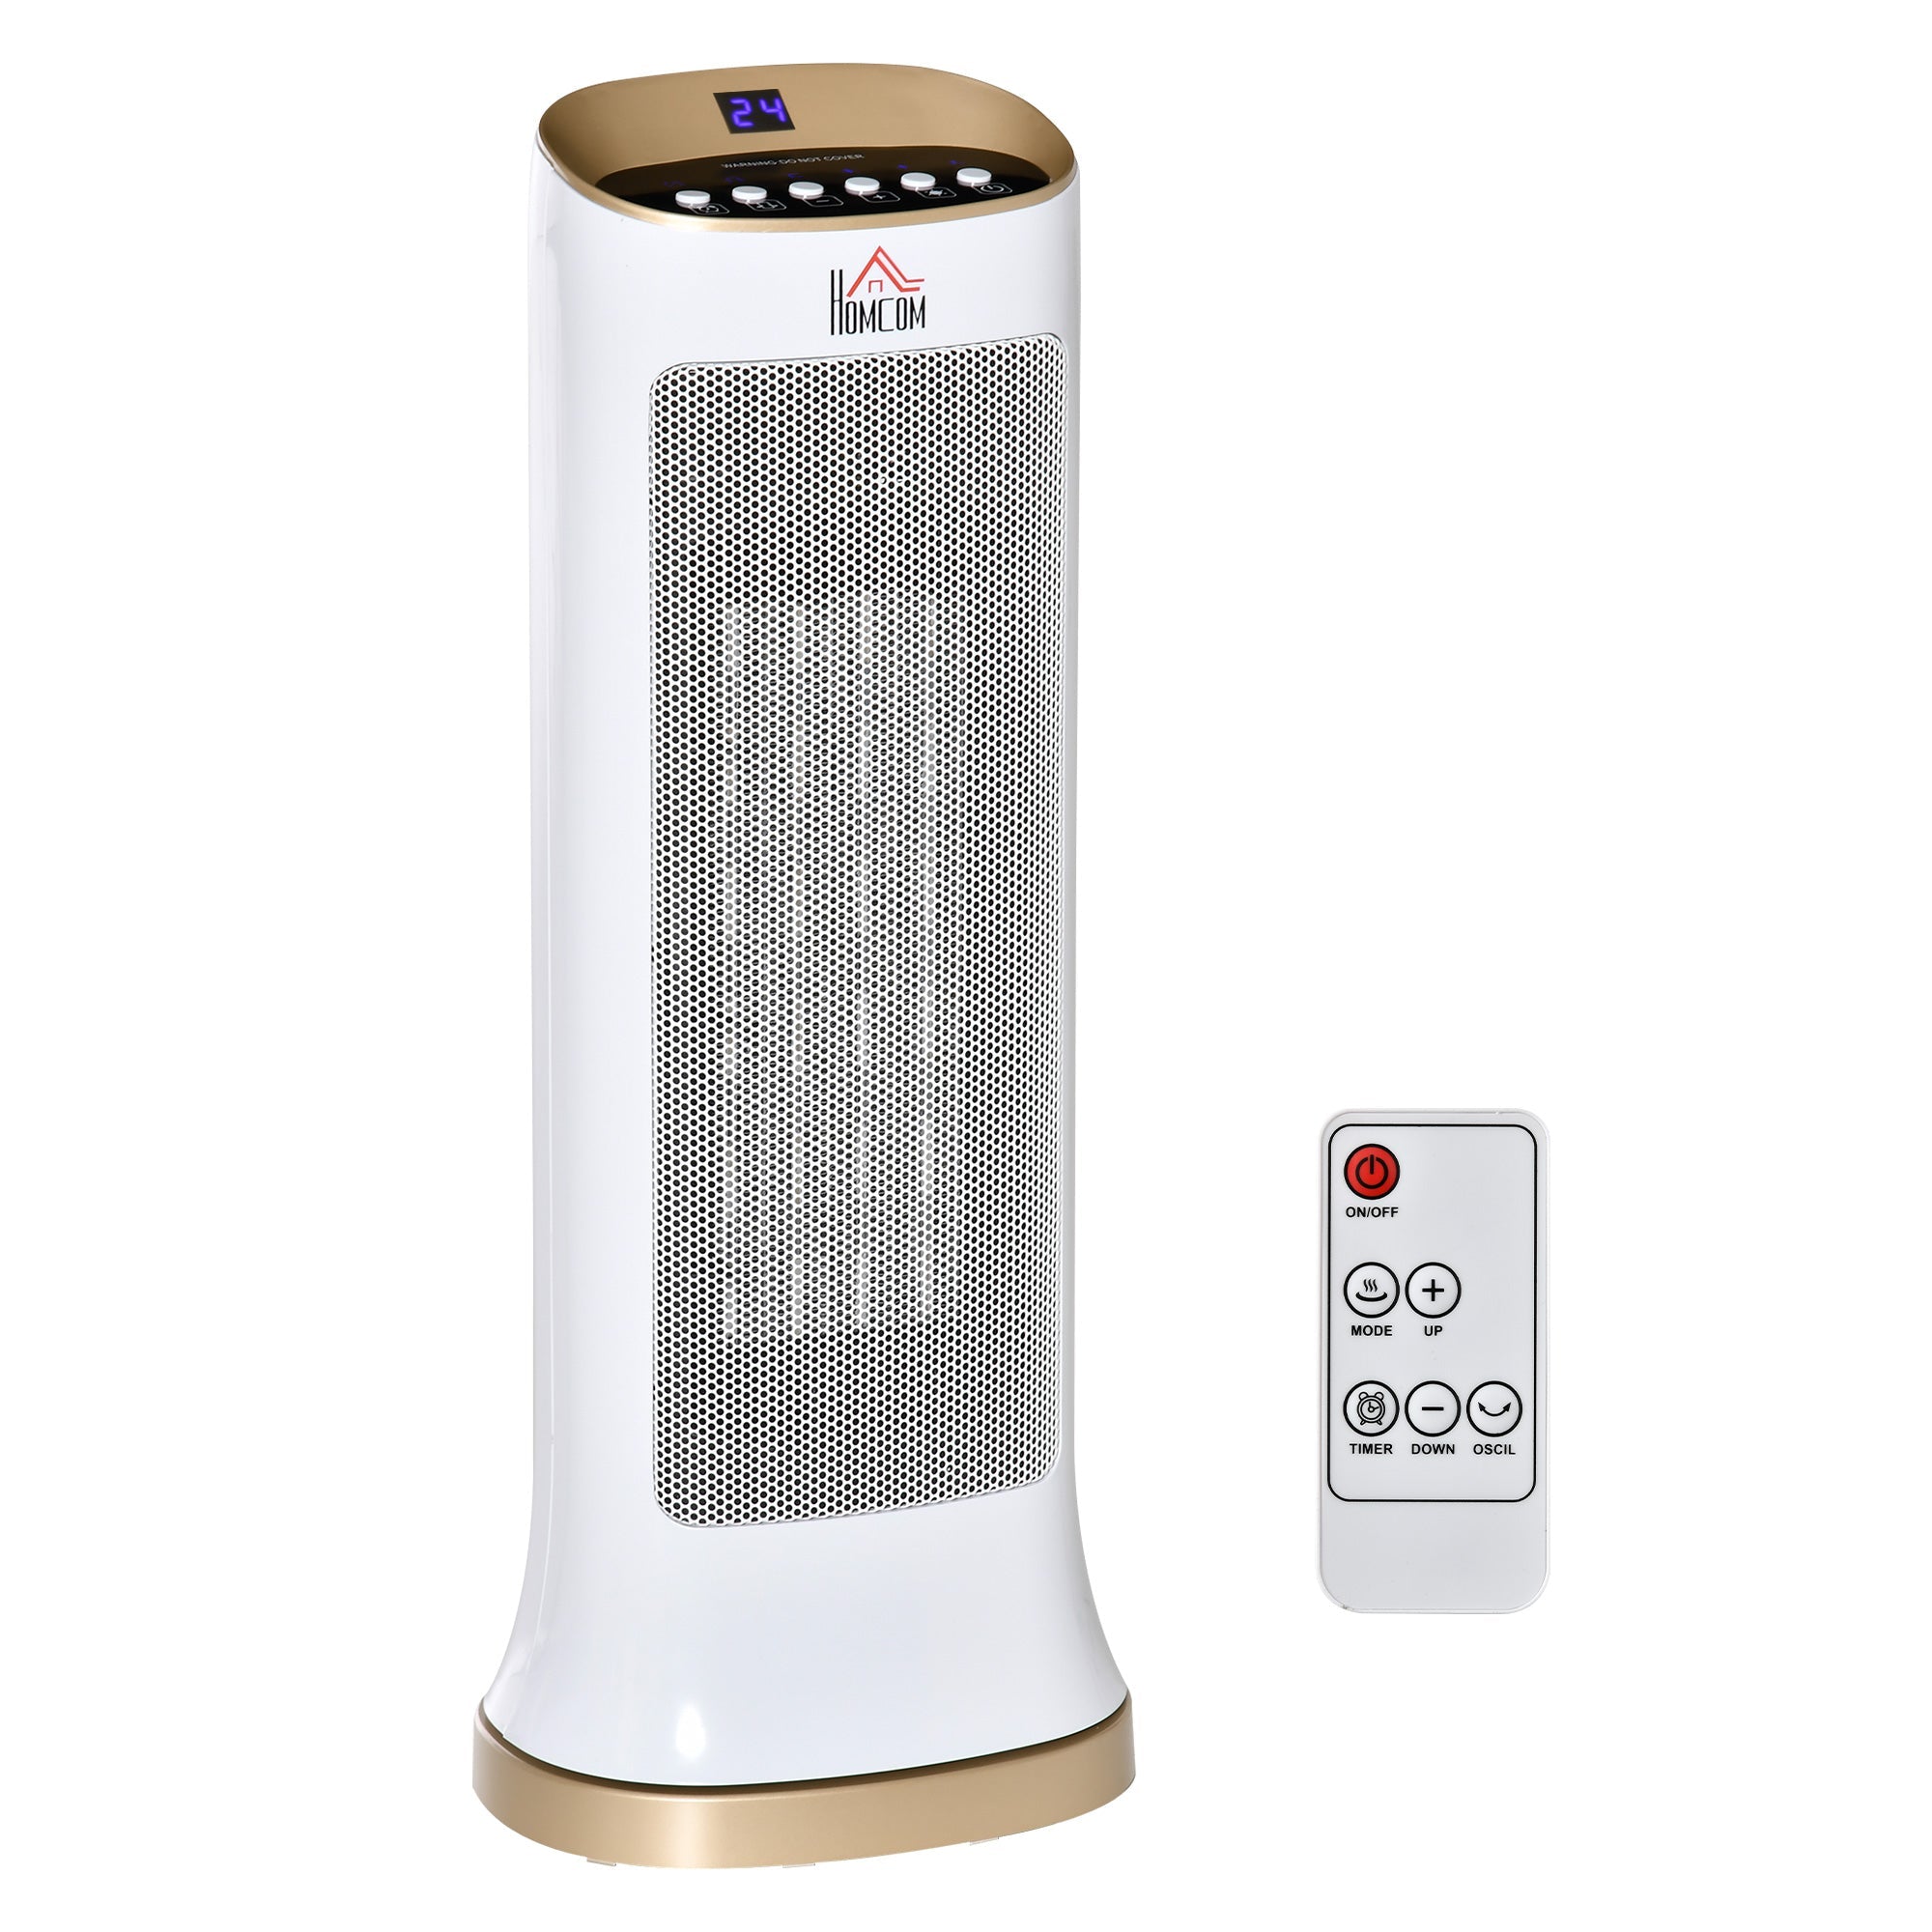 Ceramic Tower Heater 45deg Oscillating Space Heater w/ Remote Control 8hr Timer Tip-Over Overheat Protection 1000W/2000W-White Indoor LED Panel Radiator